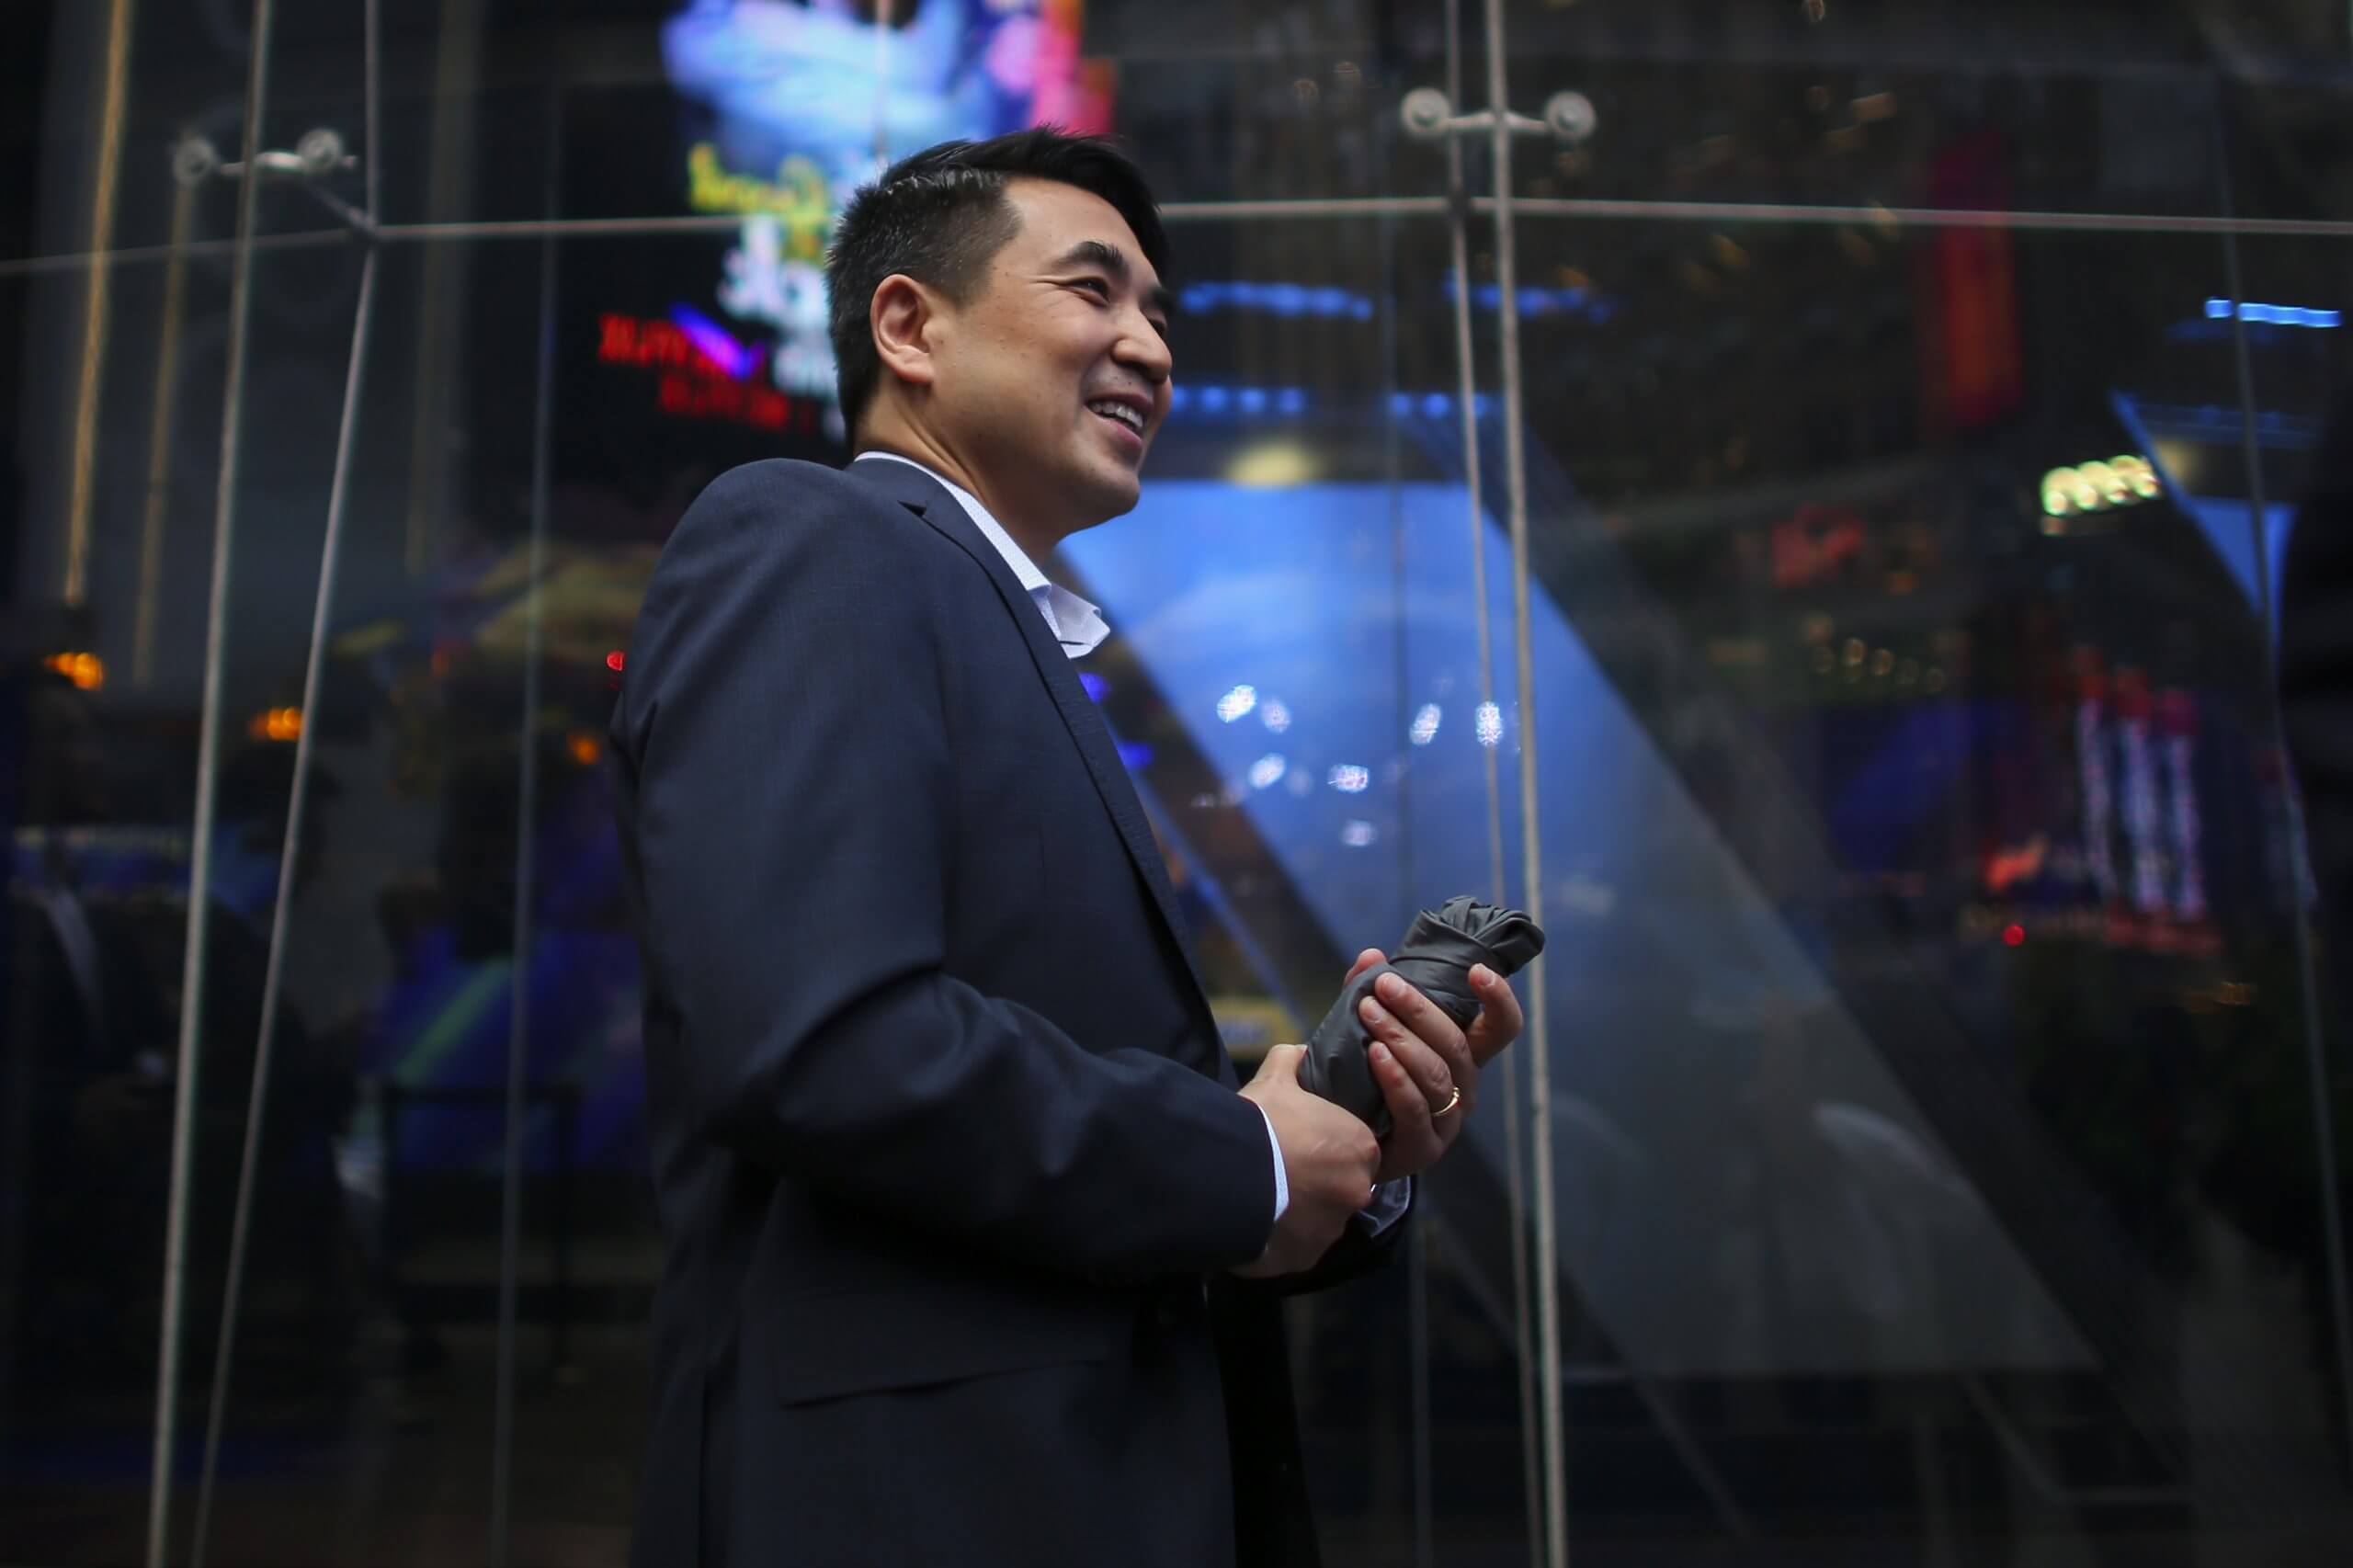 Zoom founder Eric Yuan in front of the Nasdaq building after Zoom's opening bell ceremony on April 18, 2019